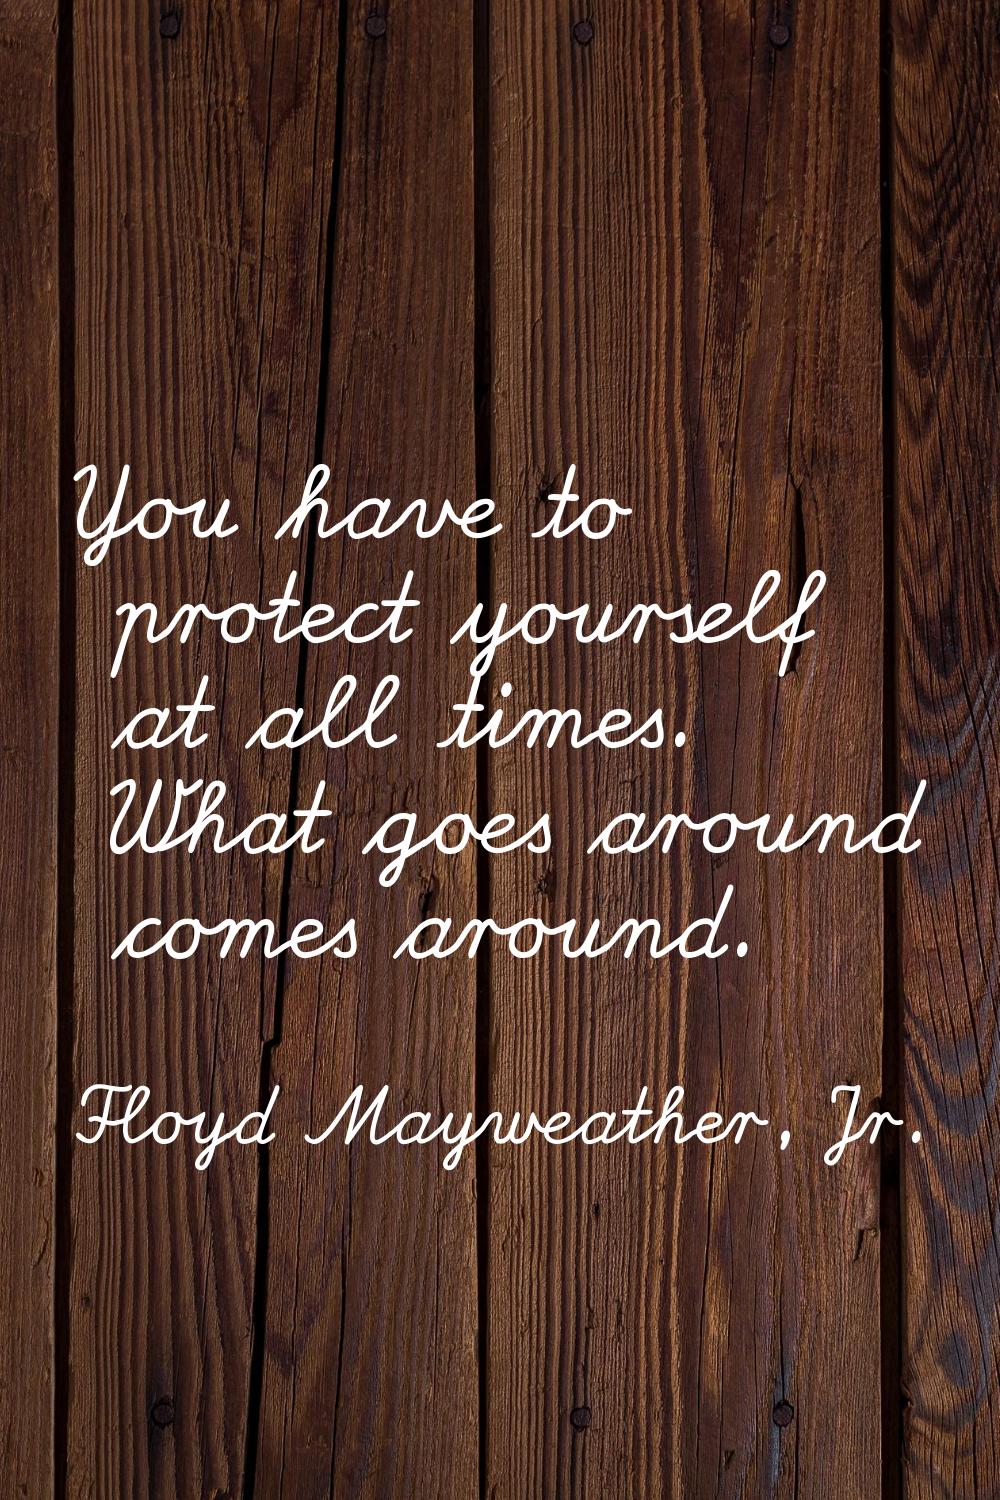 You have to protect yourself at all times. What goes around comes around.